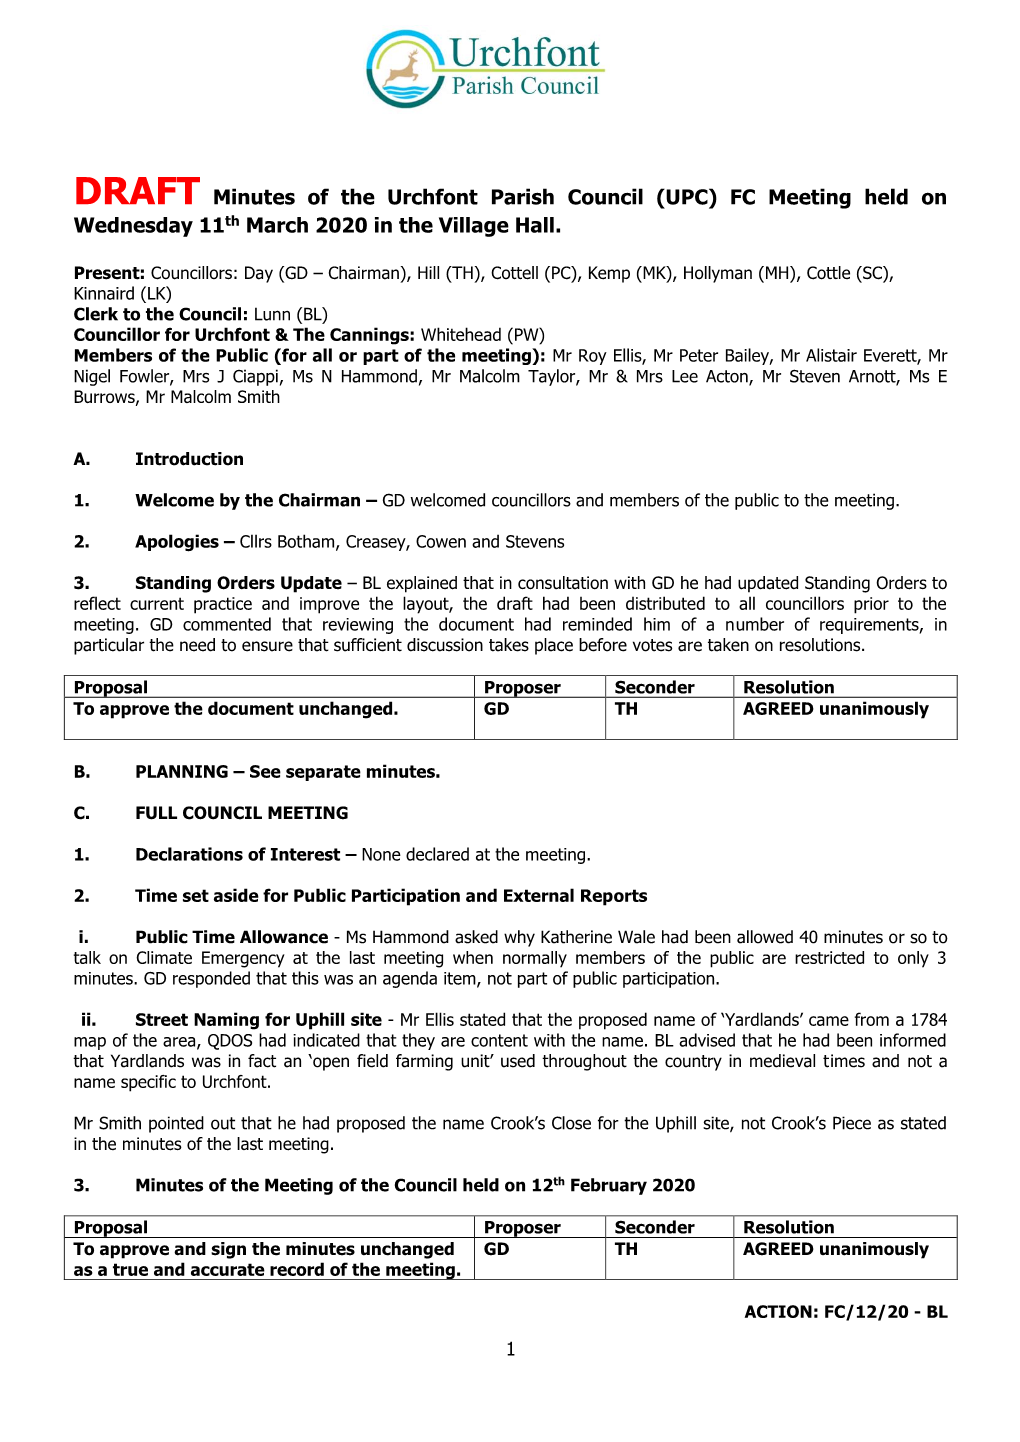 DRAFT Minutes of the Urchfont Parish Council (UPC) FC Meeting Held on Wednesday 11Th March 2020 in the Village Hall